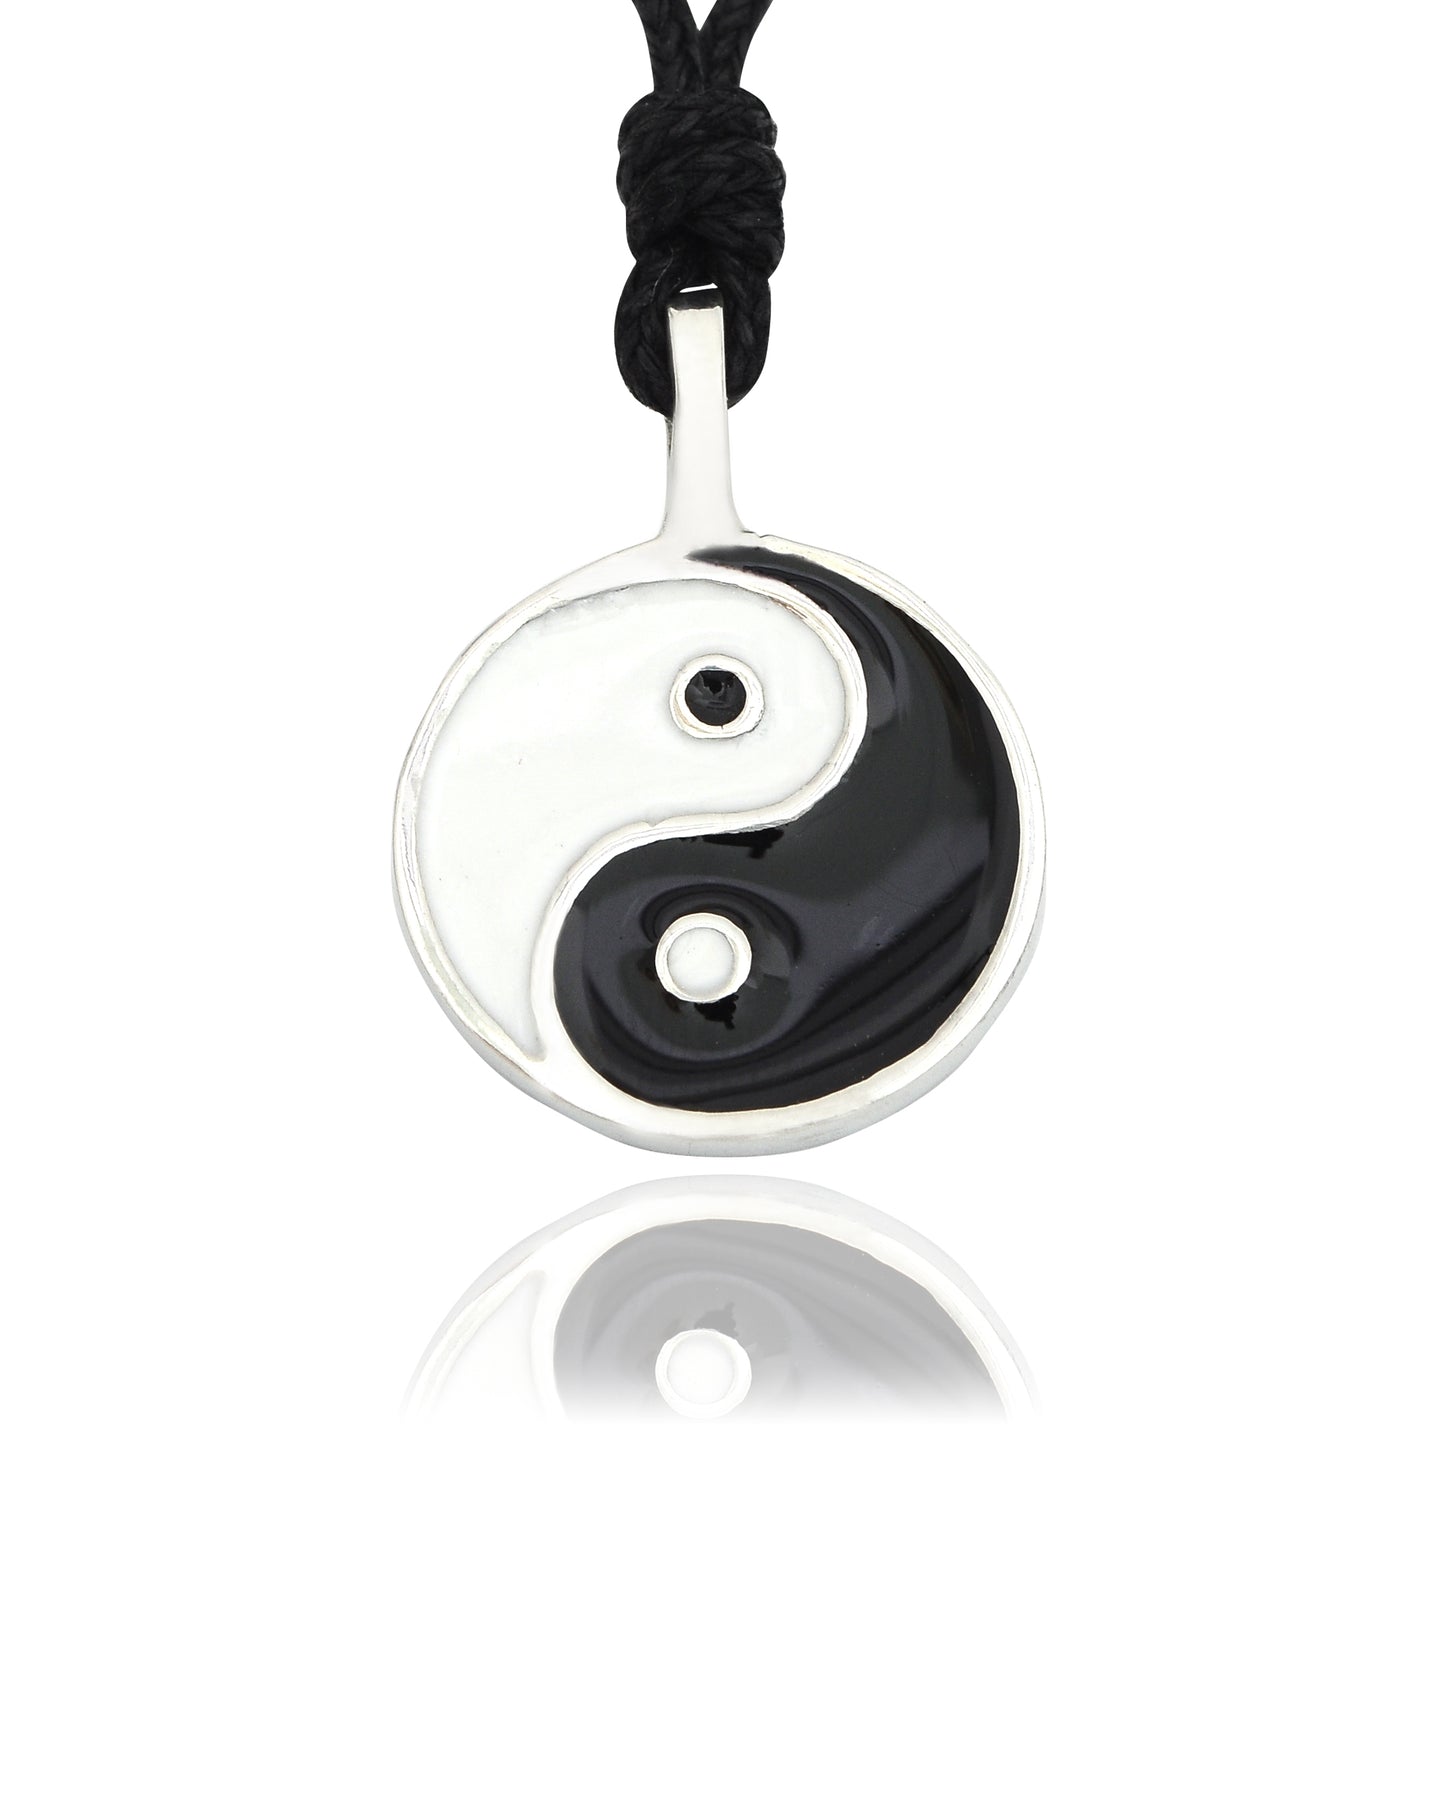 Handmade Ying Yang Silver Pewter Charm Necklace Pendant Jewelry